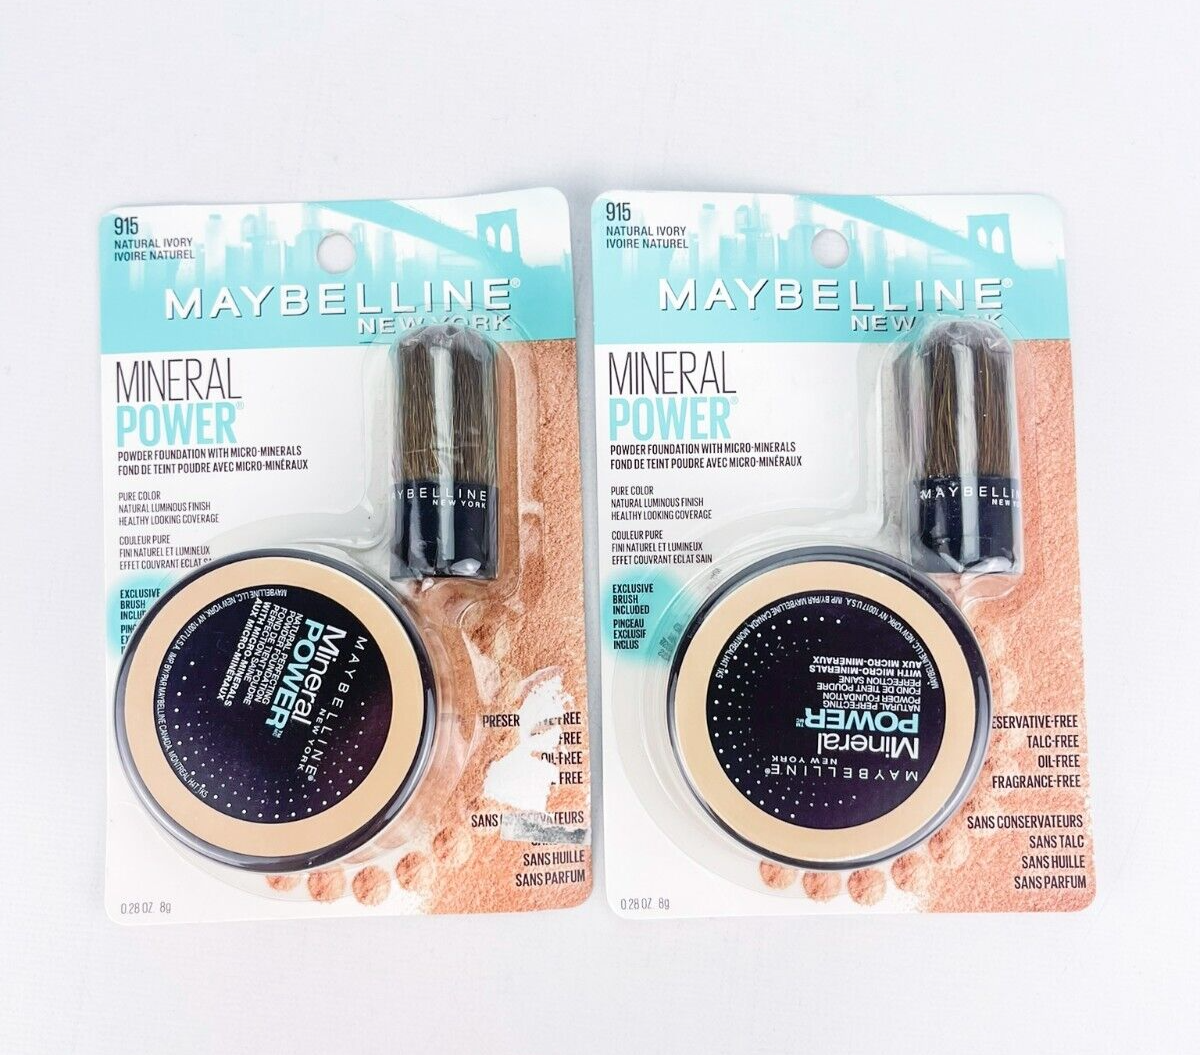 Maybelline Mineral Power Powder Foundation 915 Natural Ivory Lot Of 2 - $24.14